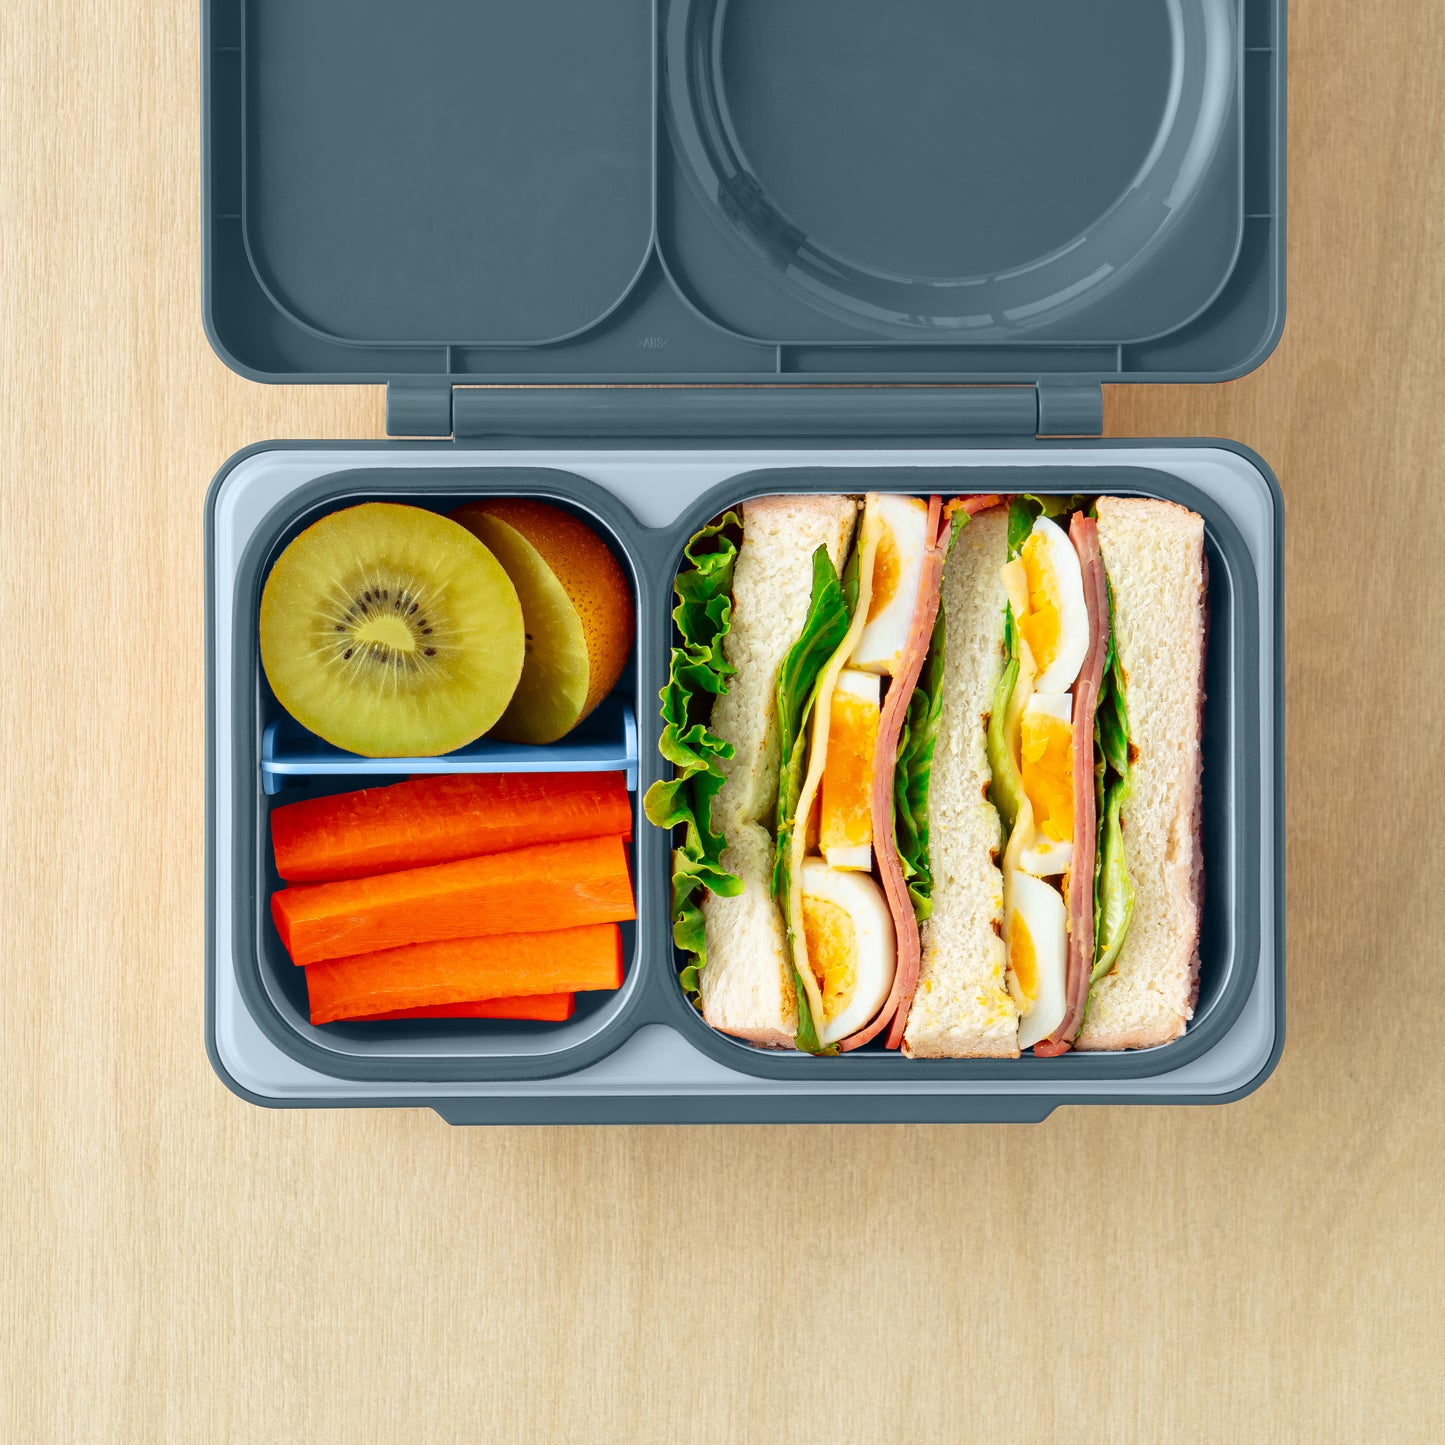 OmieBox UP Hot and Cold Bento Box - Graphite